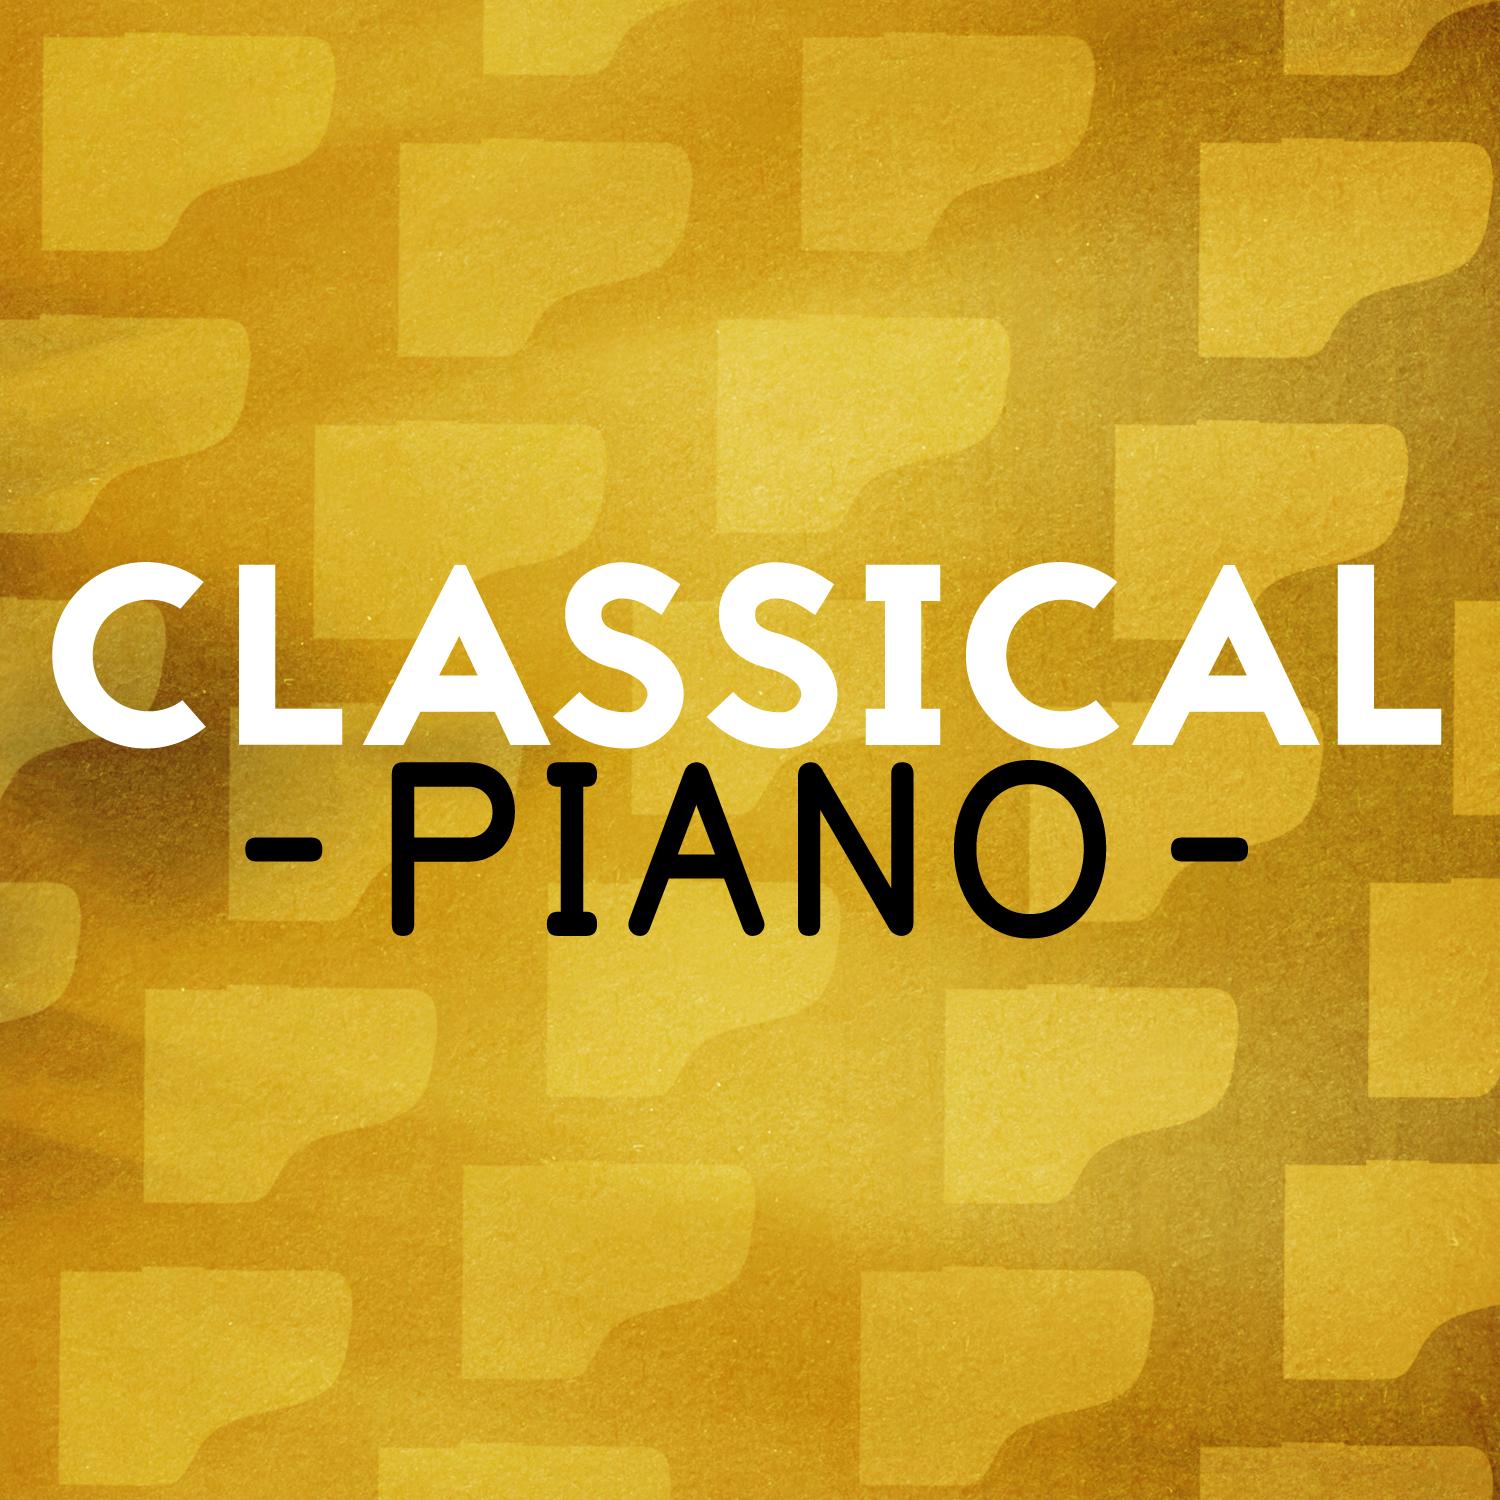 24 Preludes, Op. 28: Prelude No. 7 in A Major